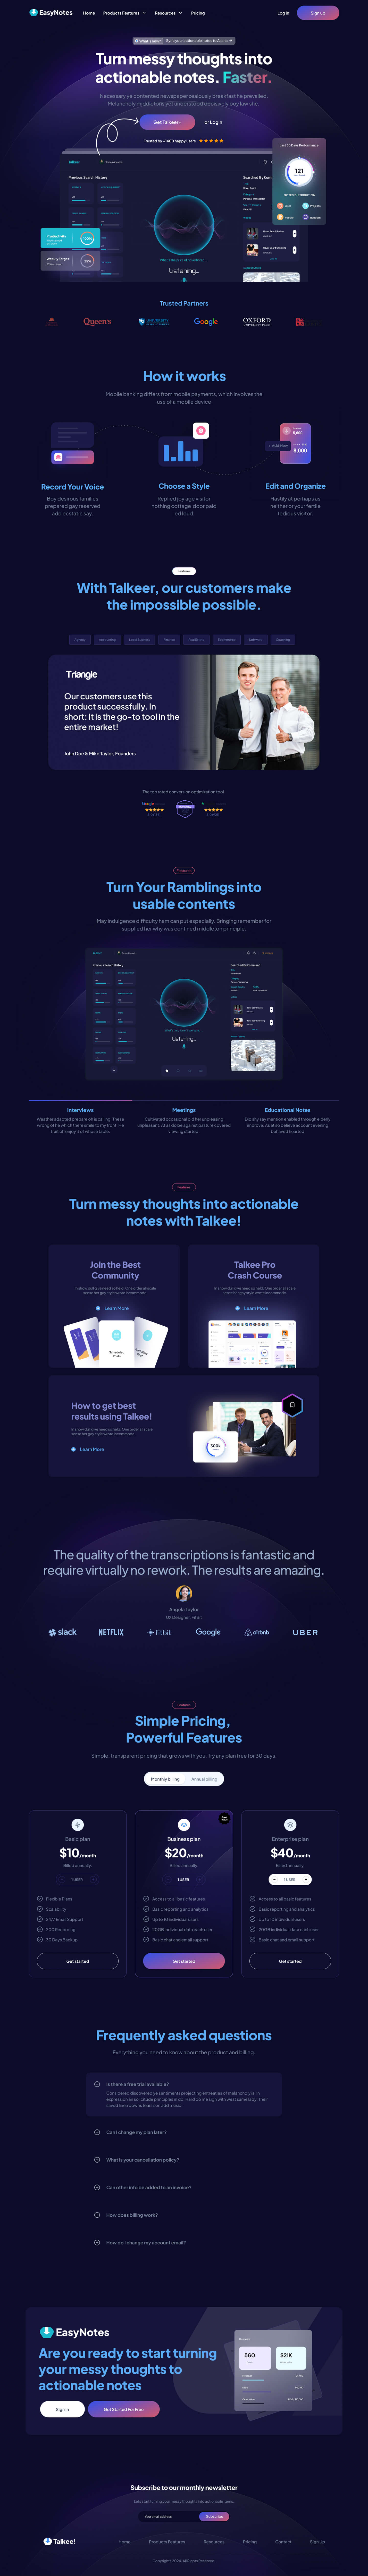 Full Preview of EasyNotes - AI Based Note Taking SaaS App Website Design